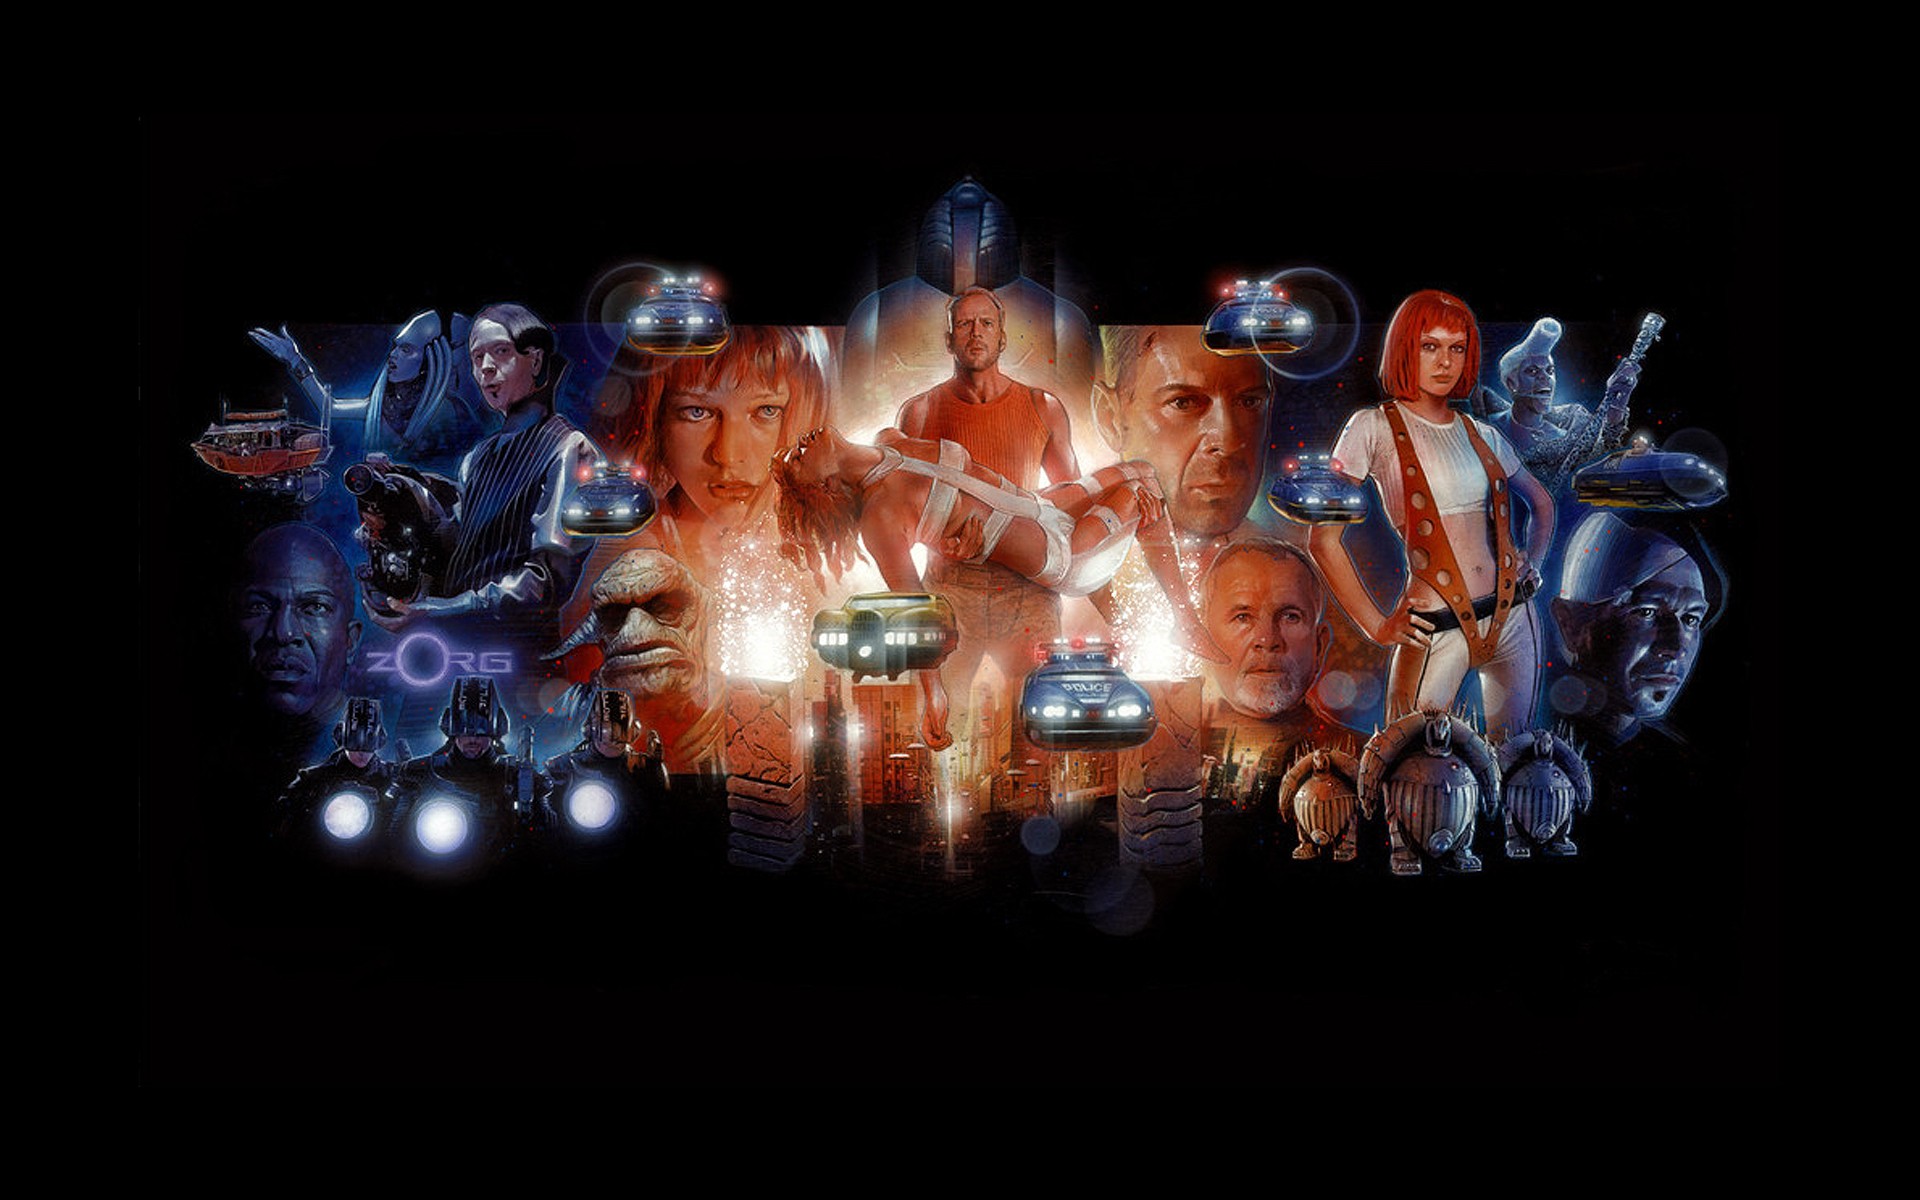 General 1920x1200 The Fifth Element movies Bruce Willis Gary Oldman science fiction fan art Milla Jovovich  Luc Besson